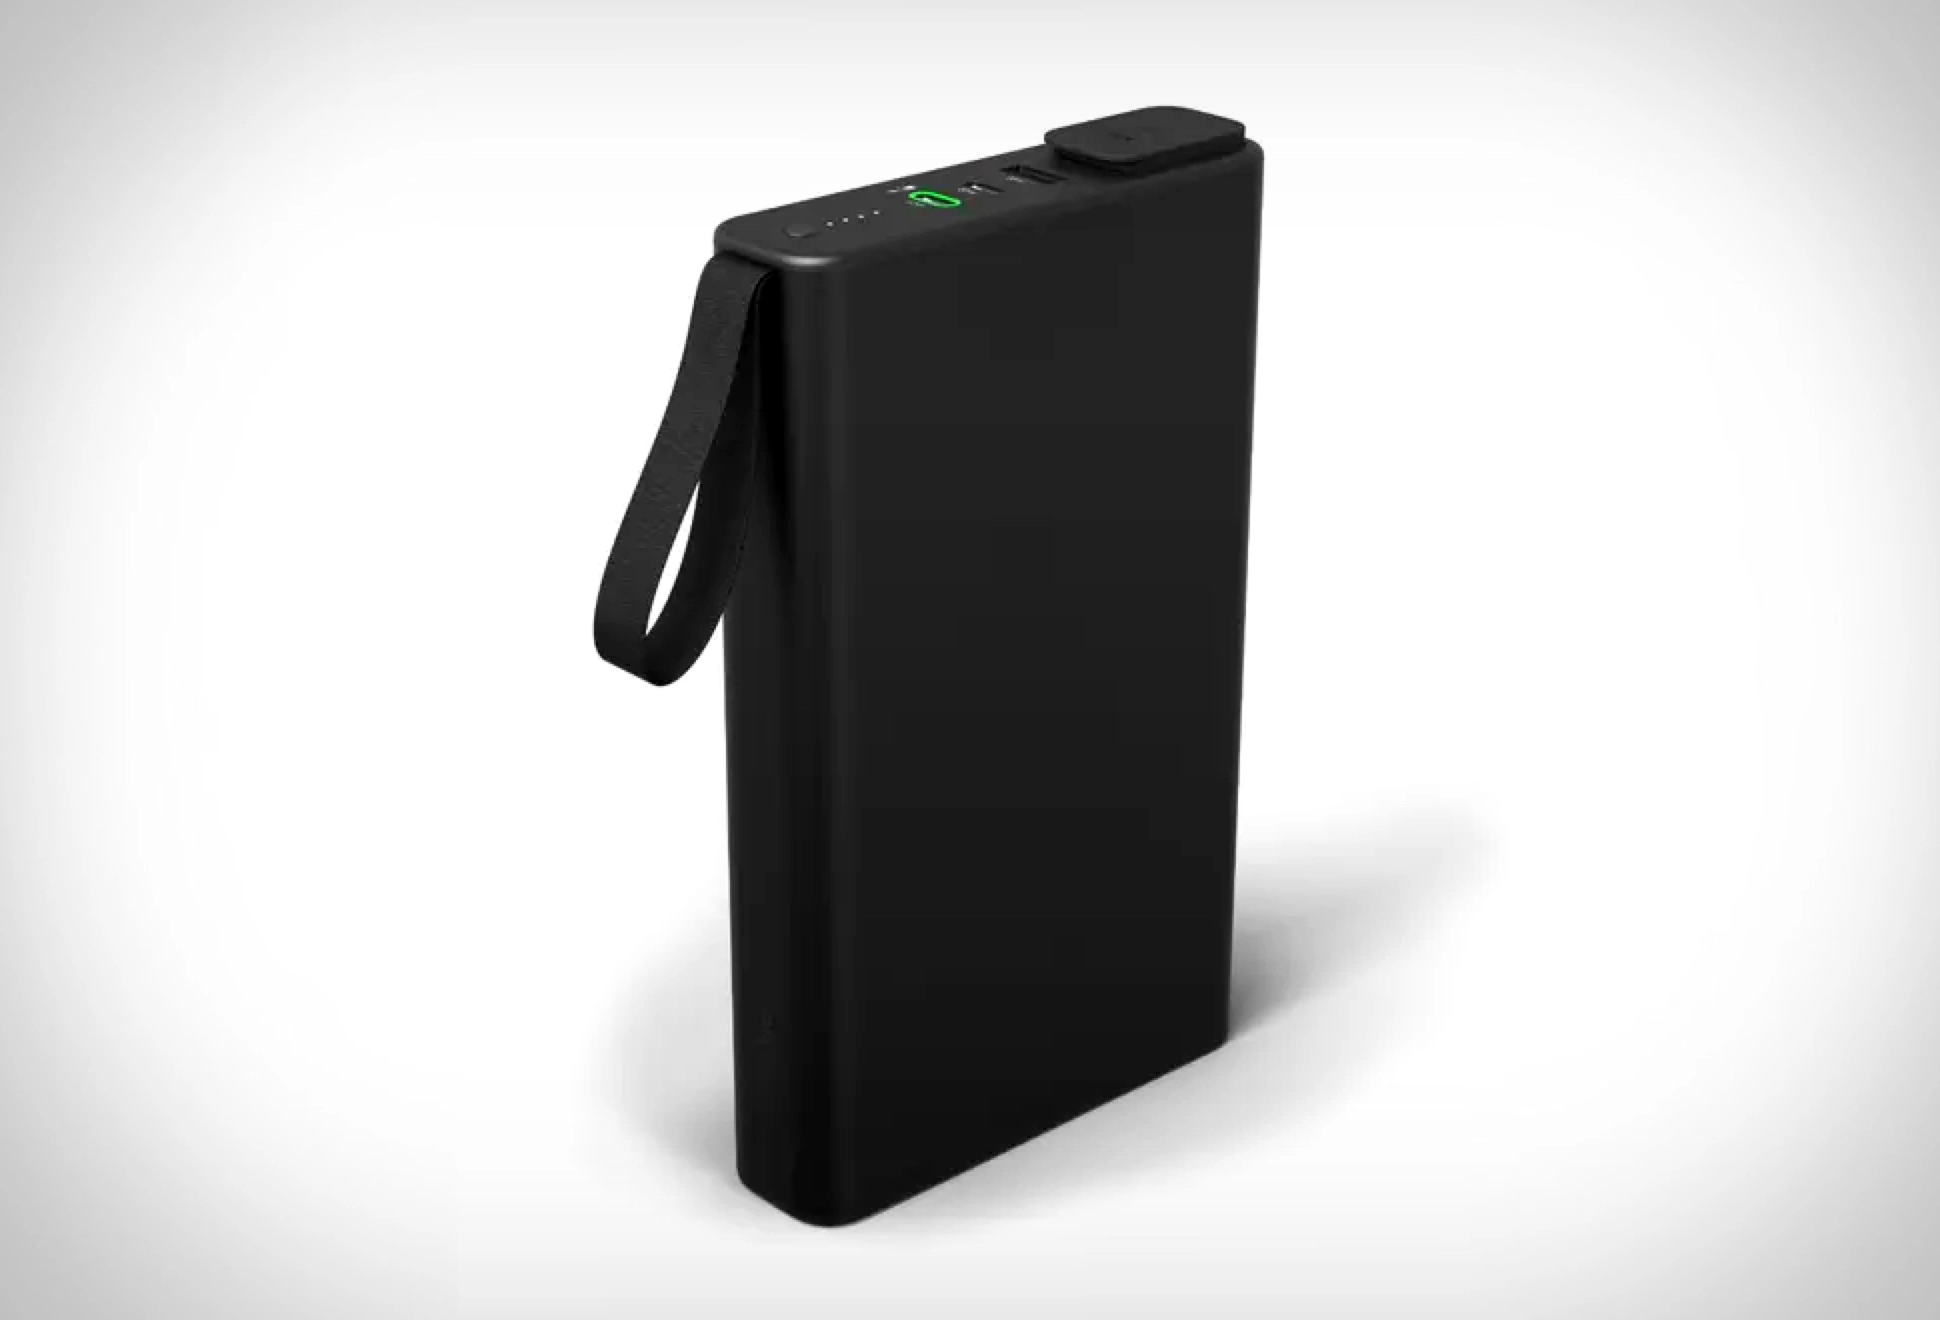 5 Phone Charges with Mophie Powerstation Pro AC